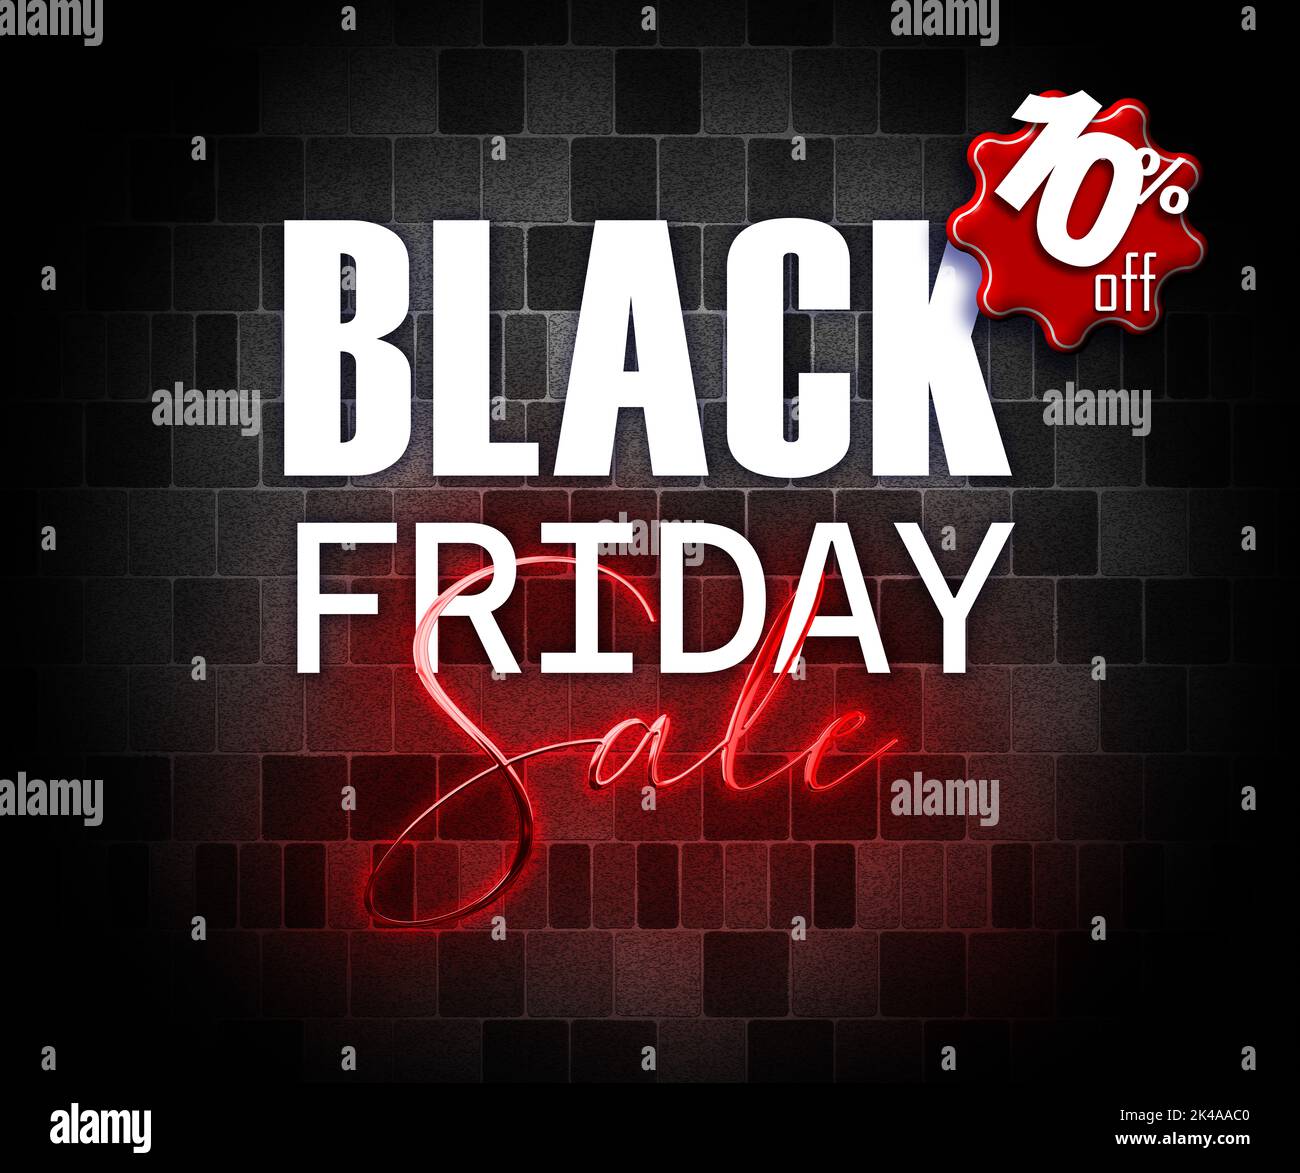 illustration with 3d elements black friday promotion banner 10 percent off sales increase Stock Photo